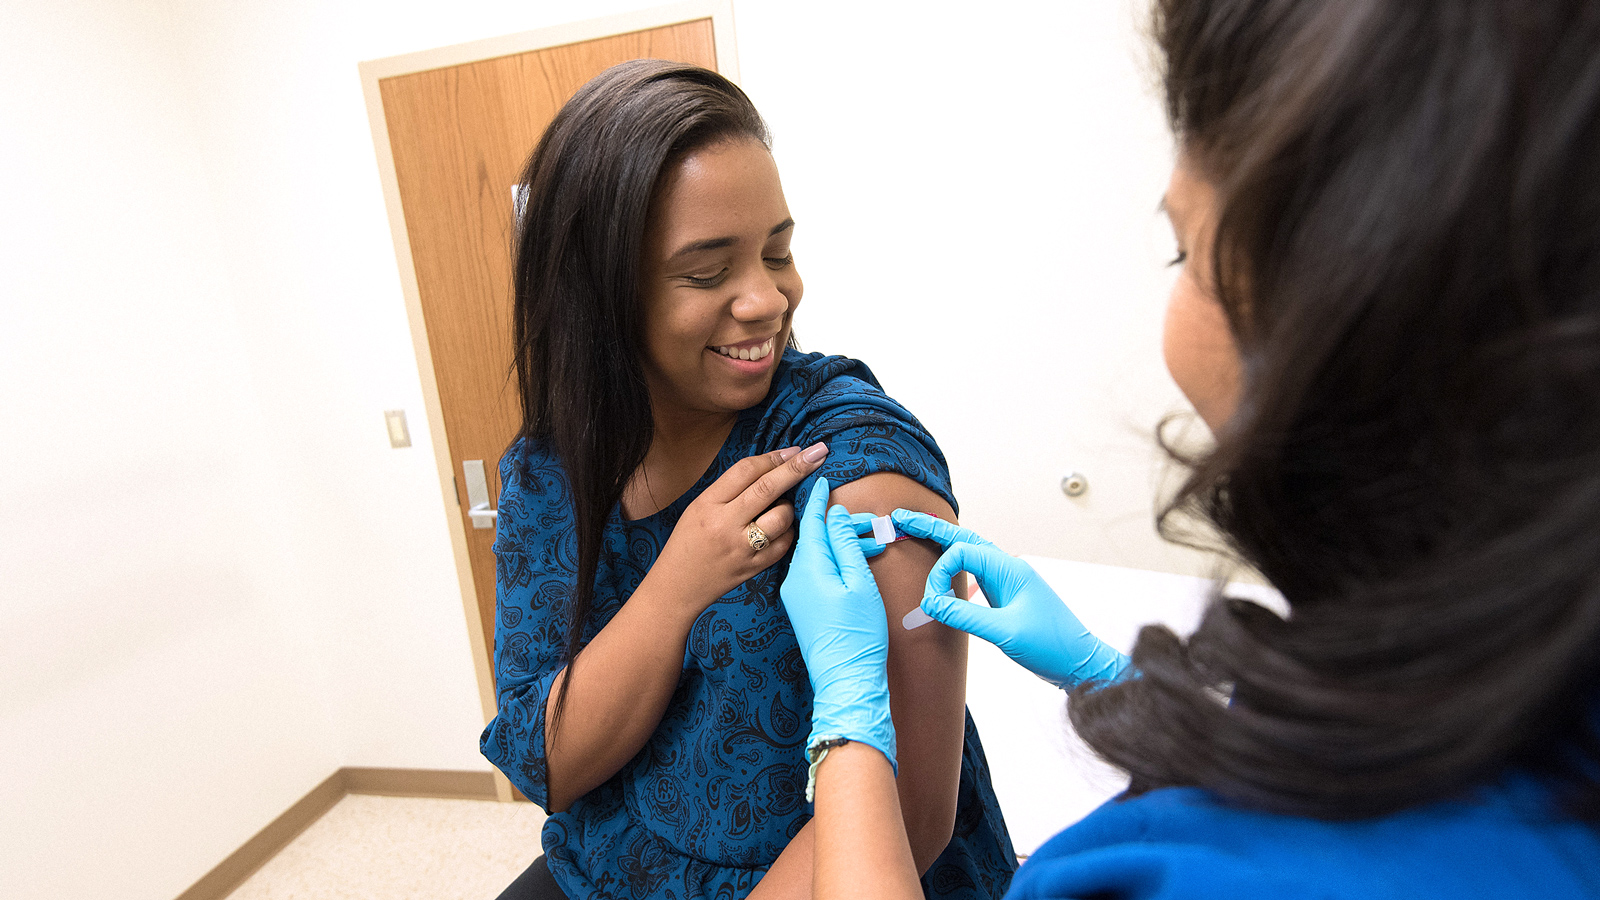 Image of a woman in a blue shirt receiving an immunisation from a health care worker